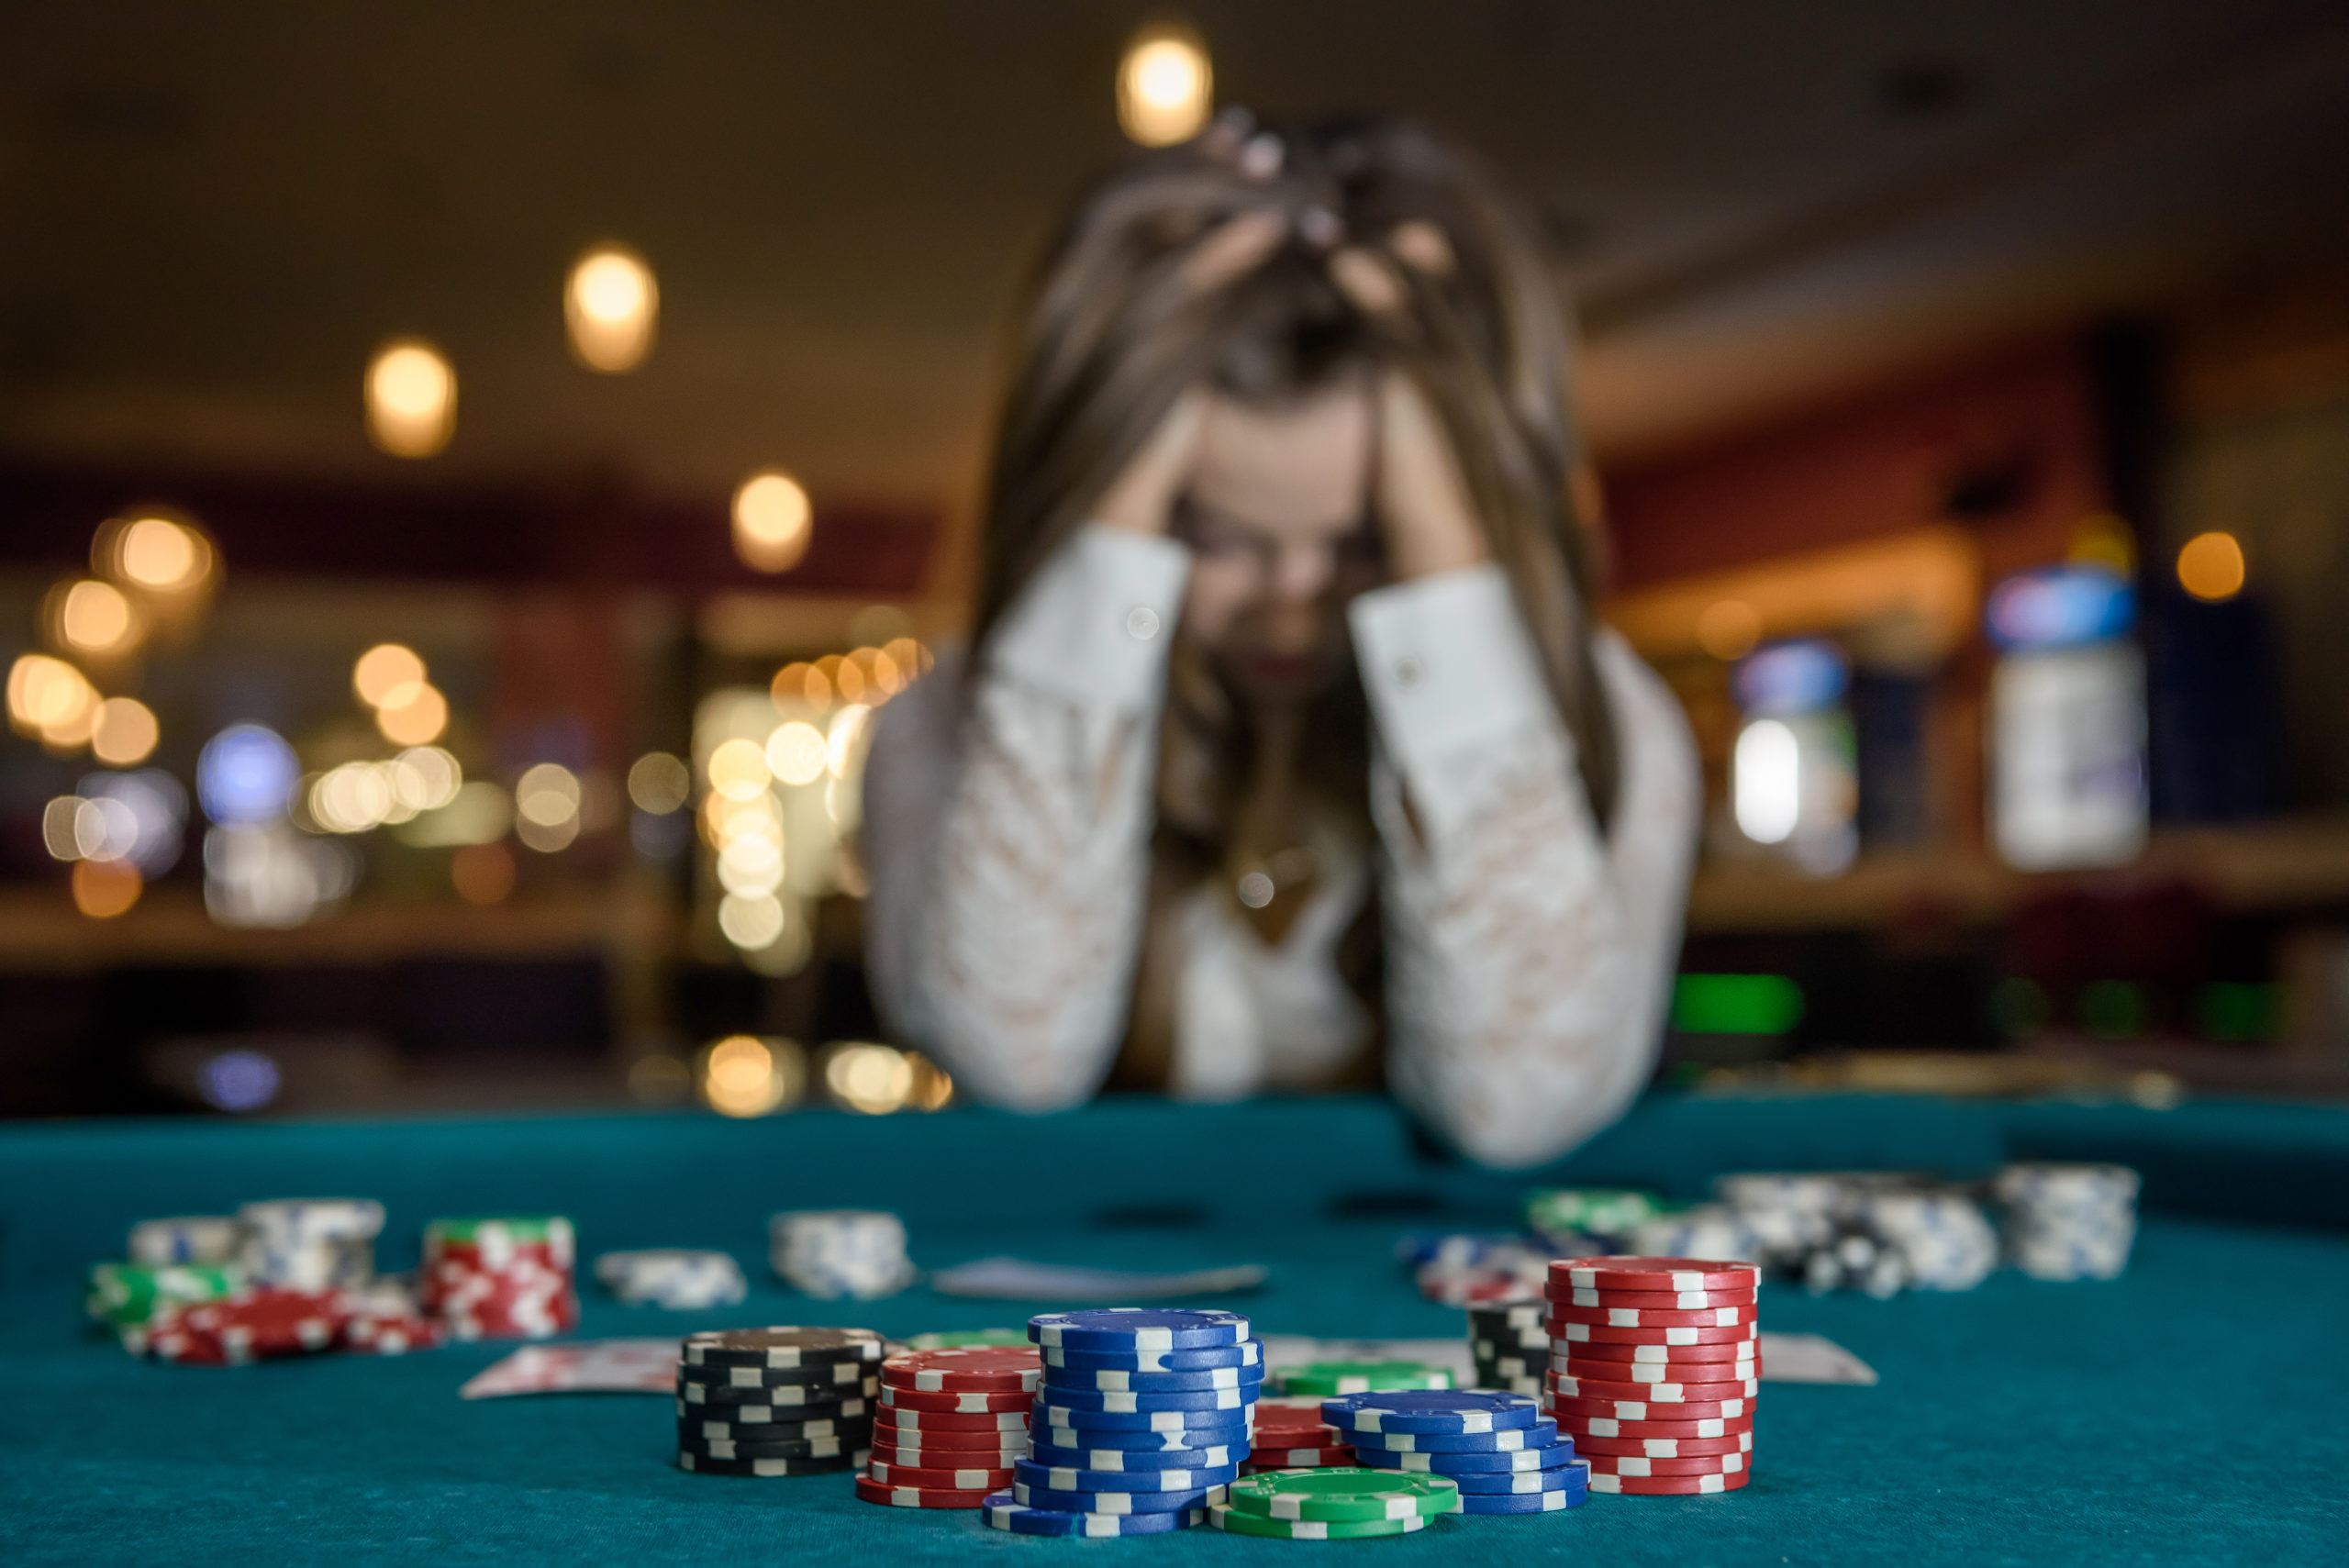 An upset woman in a casino sitting behind a poker table